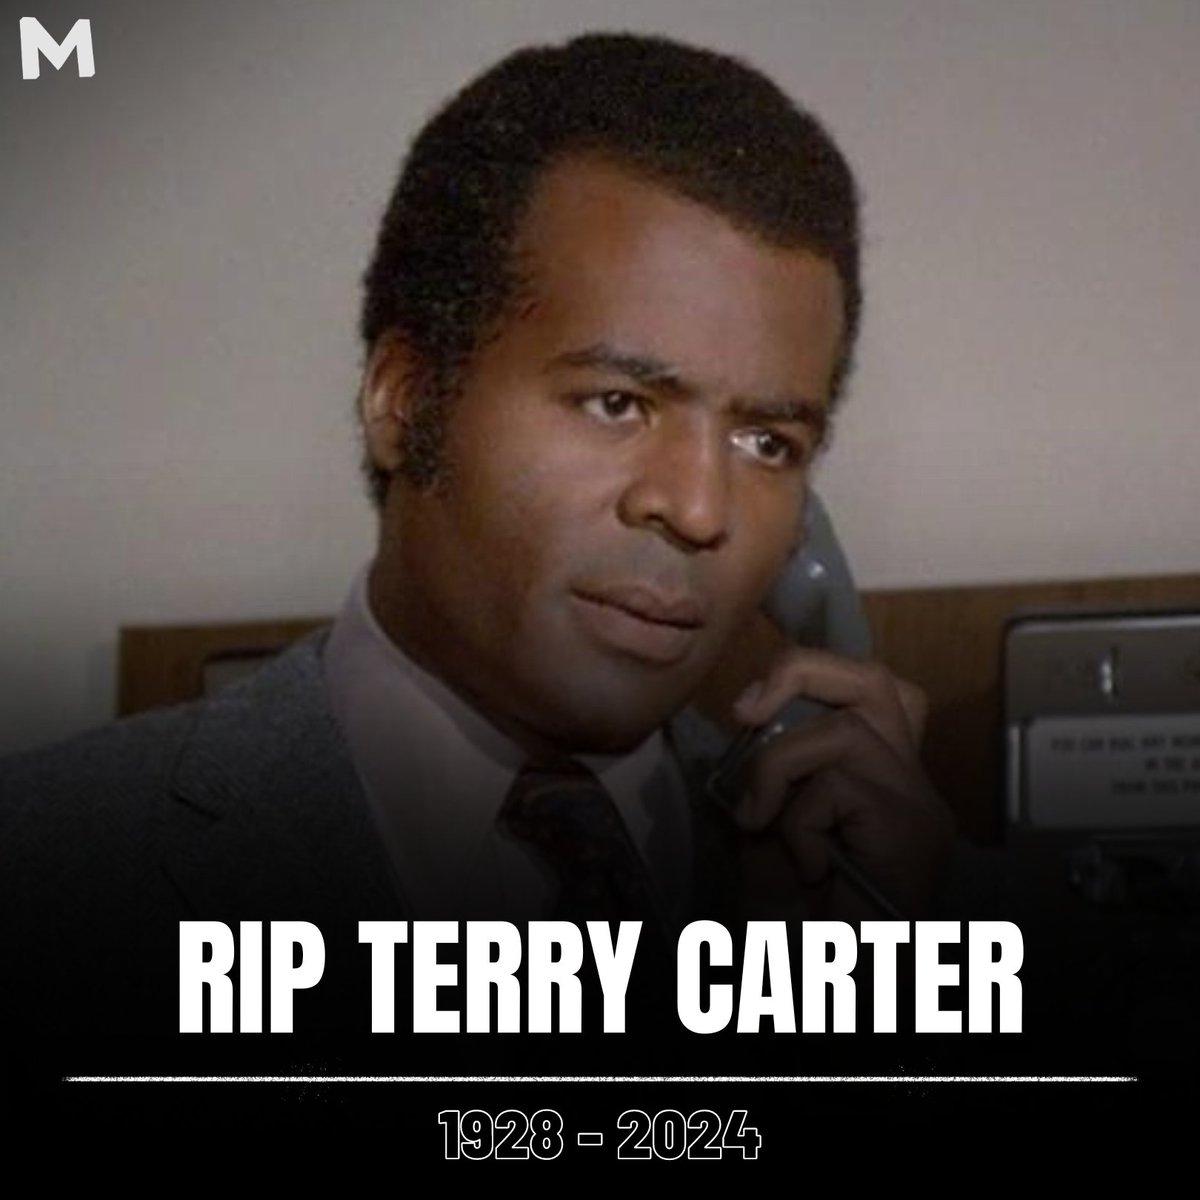 Terry Carter, famous for films like Foxy Brown and Benji, and television series like Battlestar Galactica and McCloud, has sadly passed away at the age of 95.